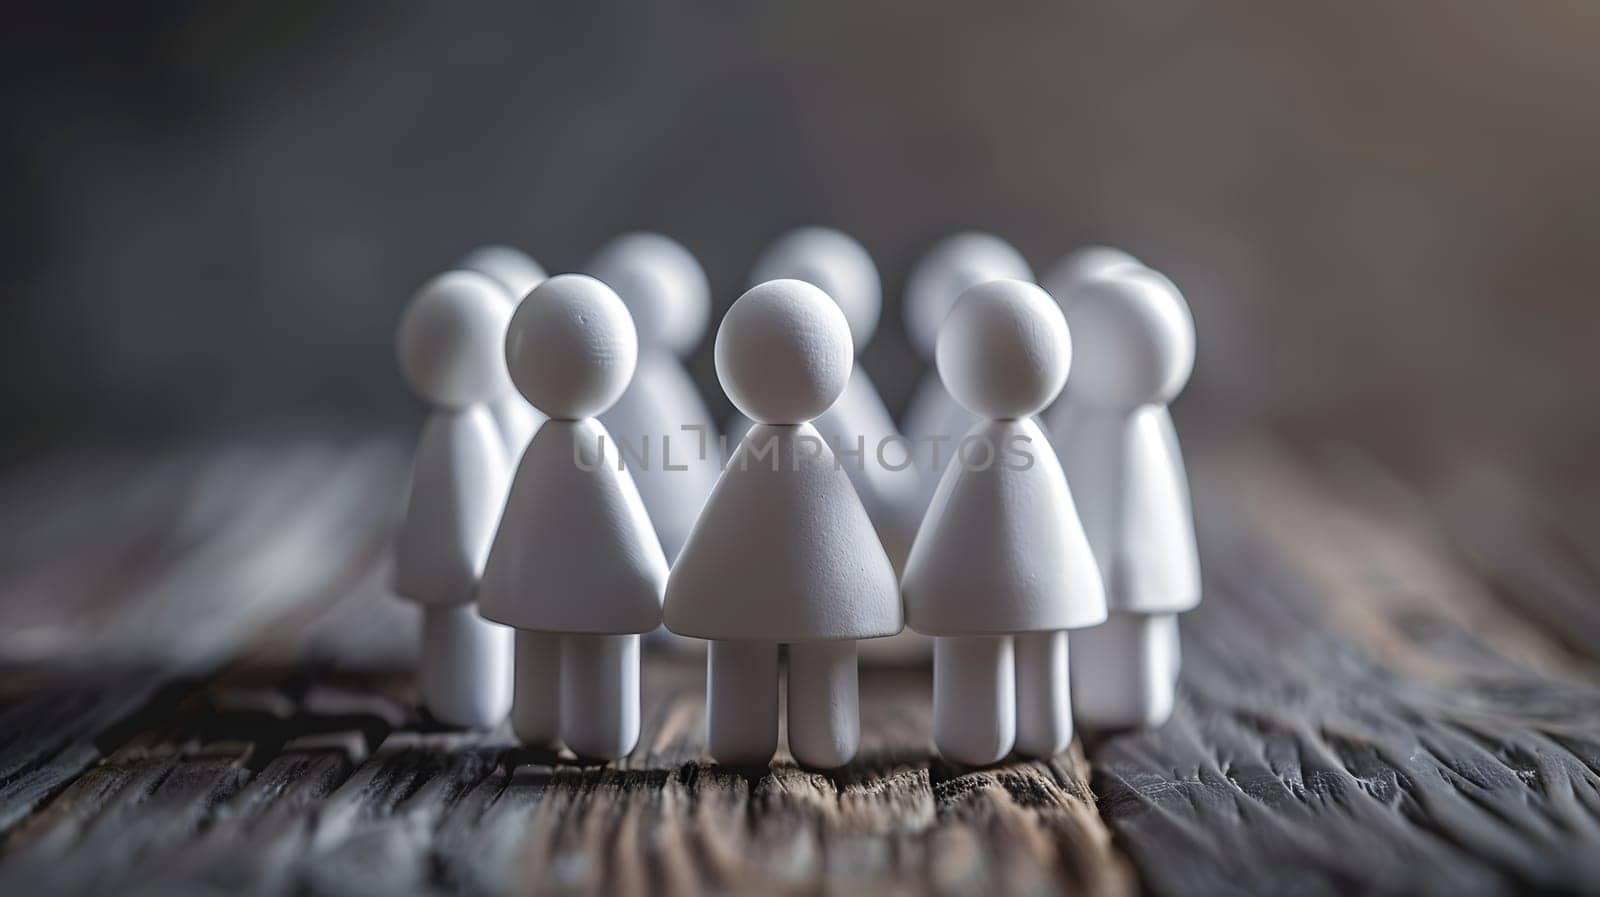 A group of white people are standing on a wooden table, wearing jewellery and fashion accessories. The scene is captured in macro photography, highlighting the metal and wood details in the darkness